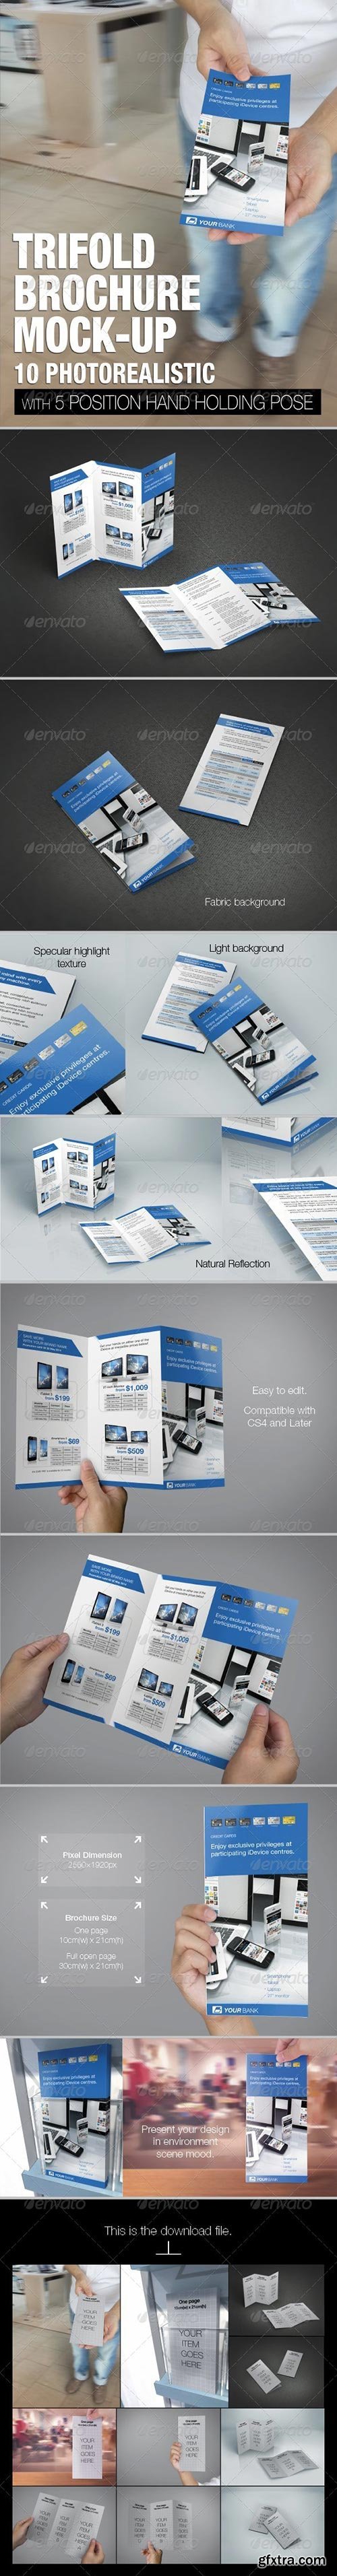 GraphicRiver - Trifold brochure mock-up 5131050